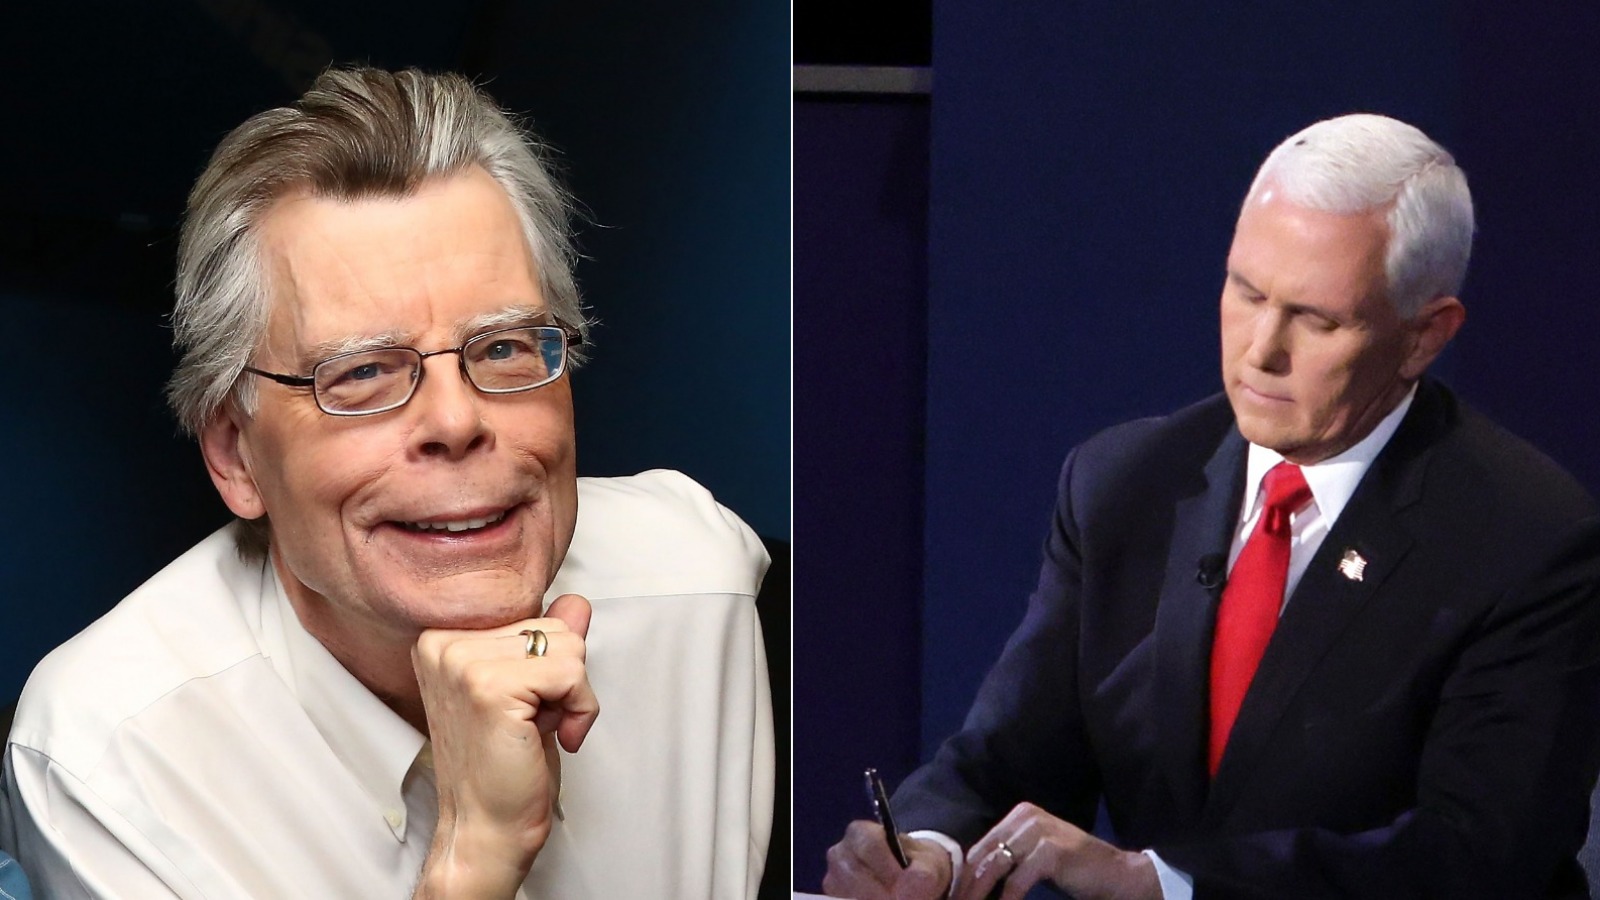 Stephen King Reacts To The Fly In Mike Pence's Hair